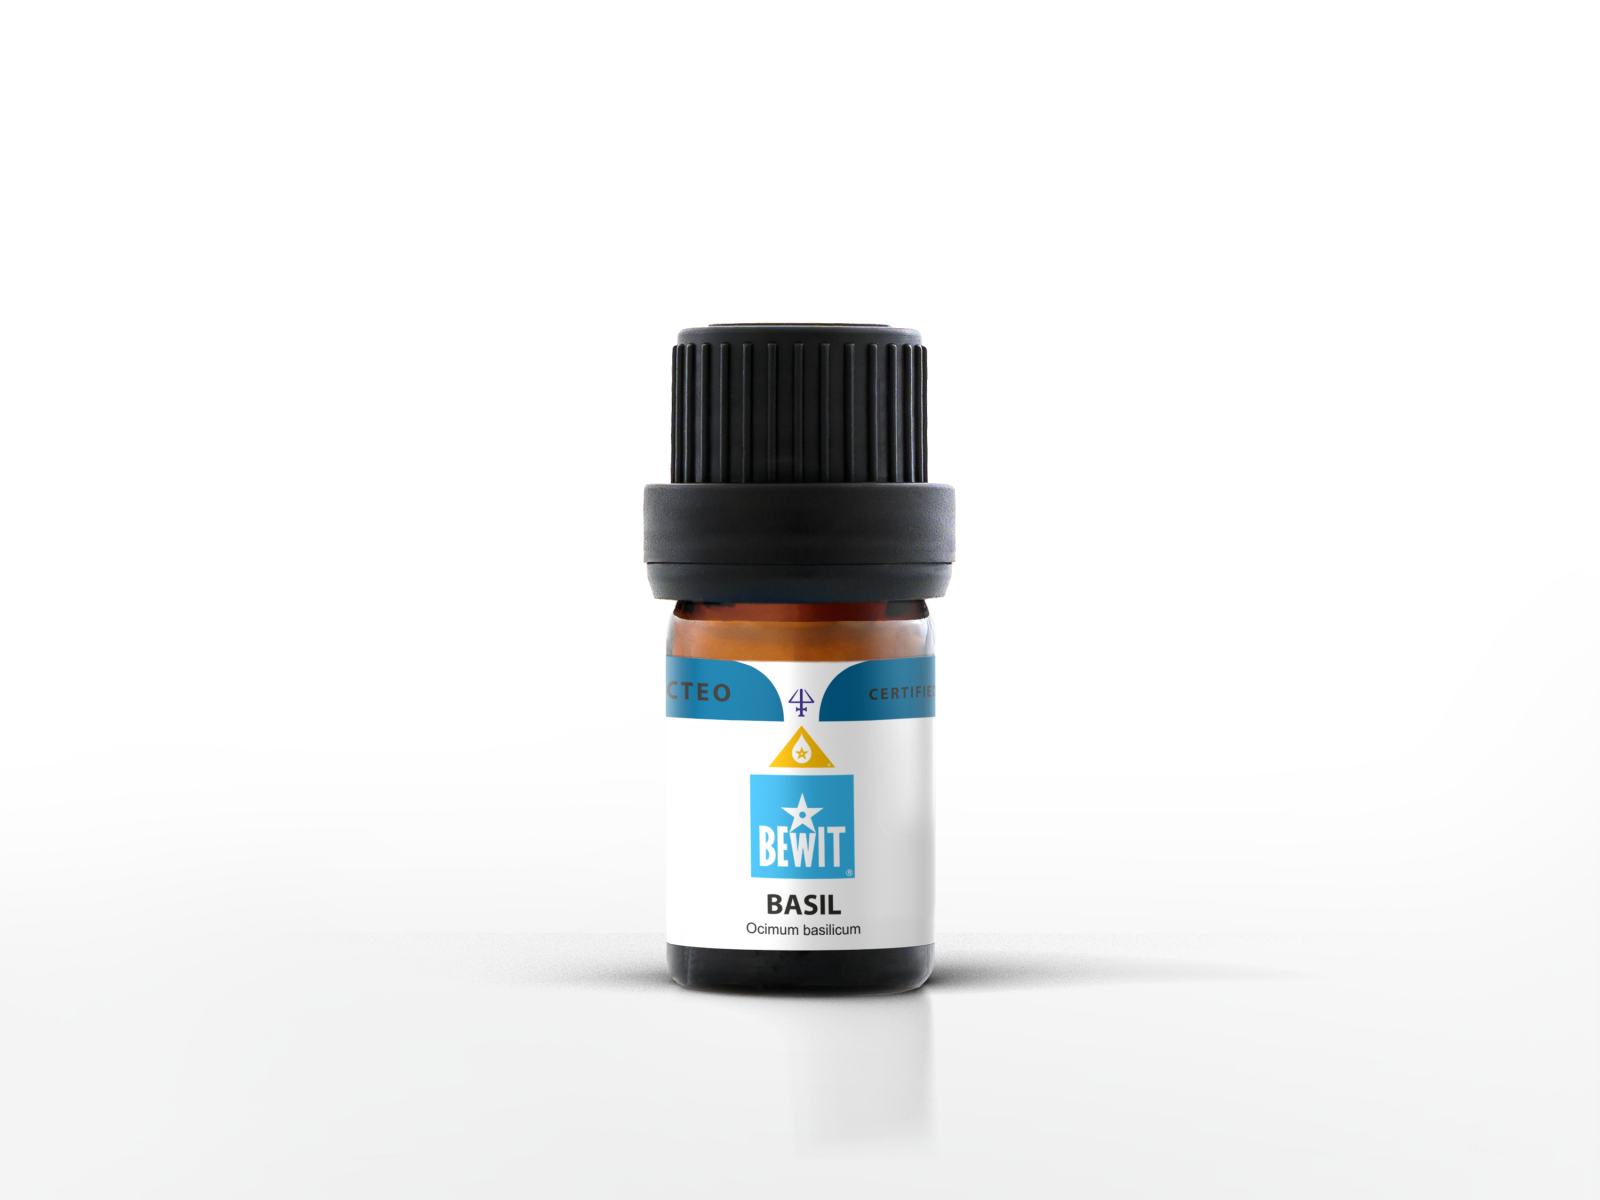 Basil. - This is a 100% pure essential oil - 4